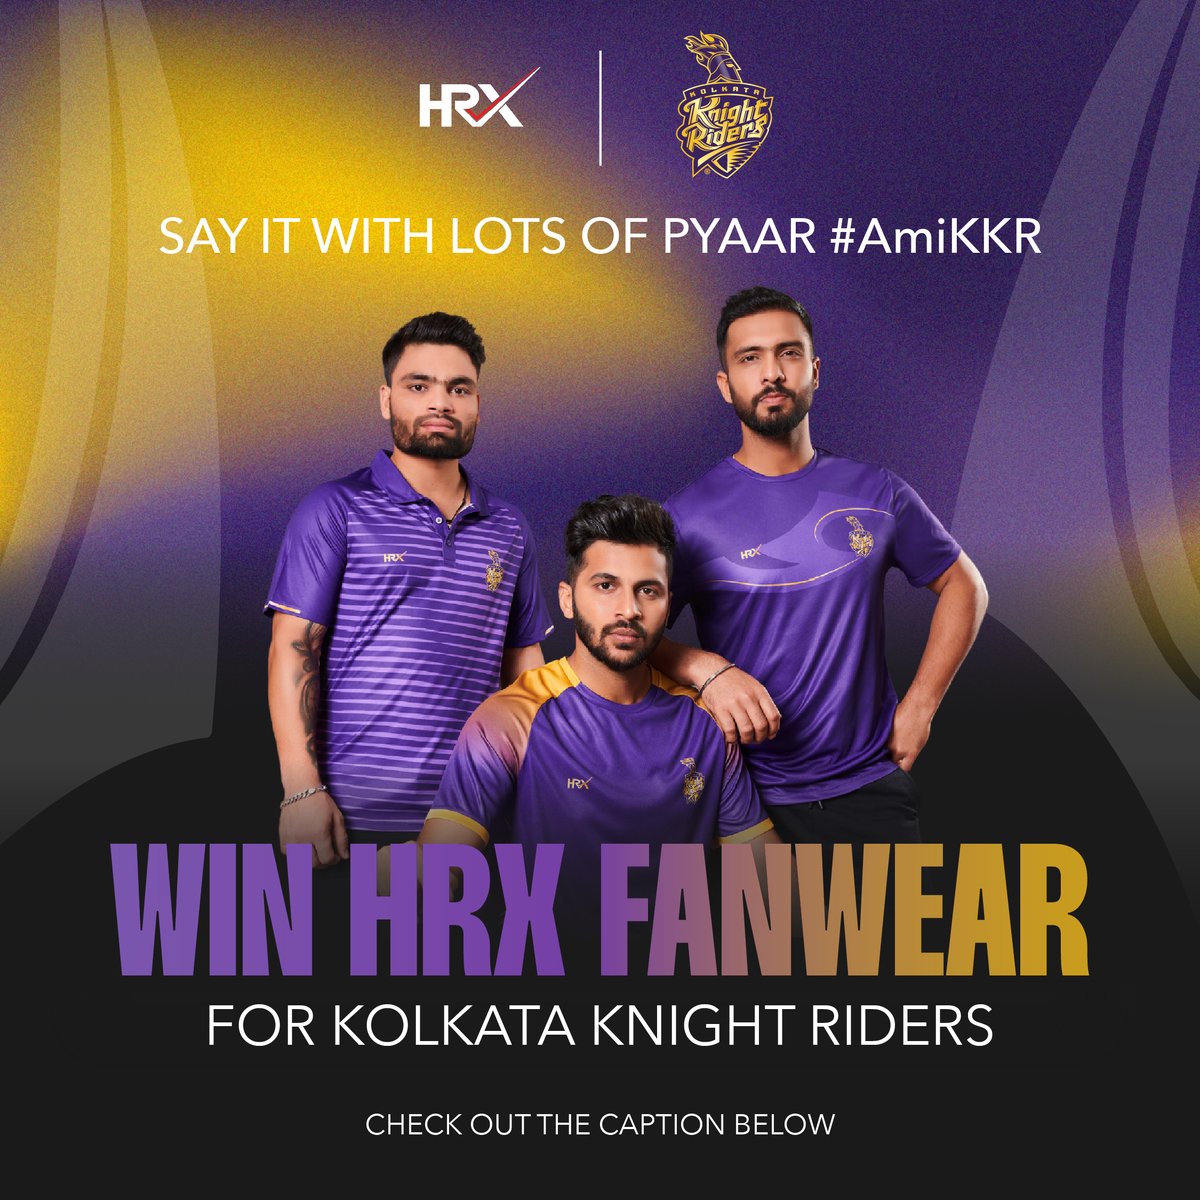 🚨CONTEST ALERT!🚨

Show up to this T20 season to say #AmiKKR, say it in style 👀 Here’s how 👇

Stand a chance to win HRX Fanwear for KKR with these 3 easy steps 👇
🏏 Comment #AmiKKR
🏏 Tag 3 @KKR fans
🏏 Follow @hrxbrand 

#HRXForTheKKRSpirit #KKR #IP2023 #FanTohFanHotaHai